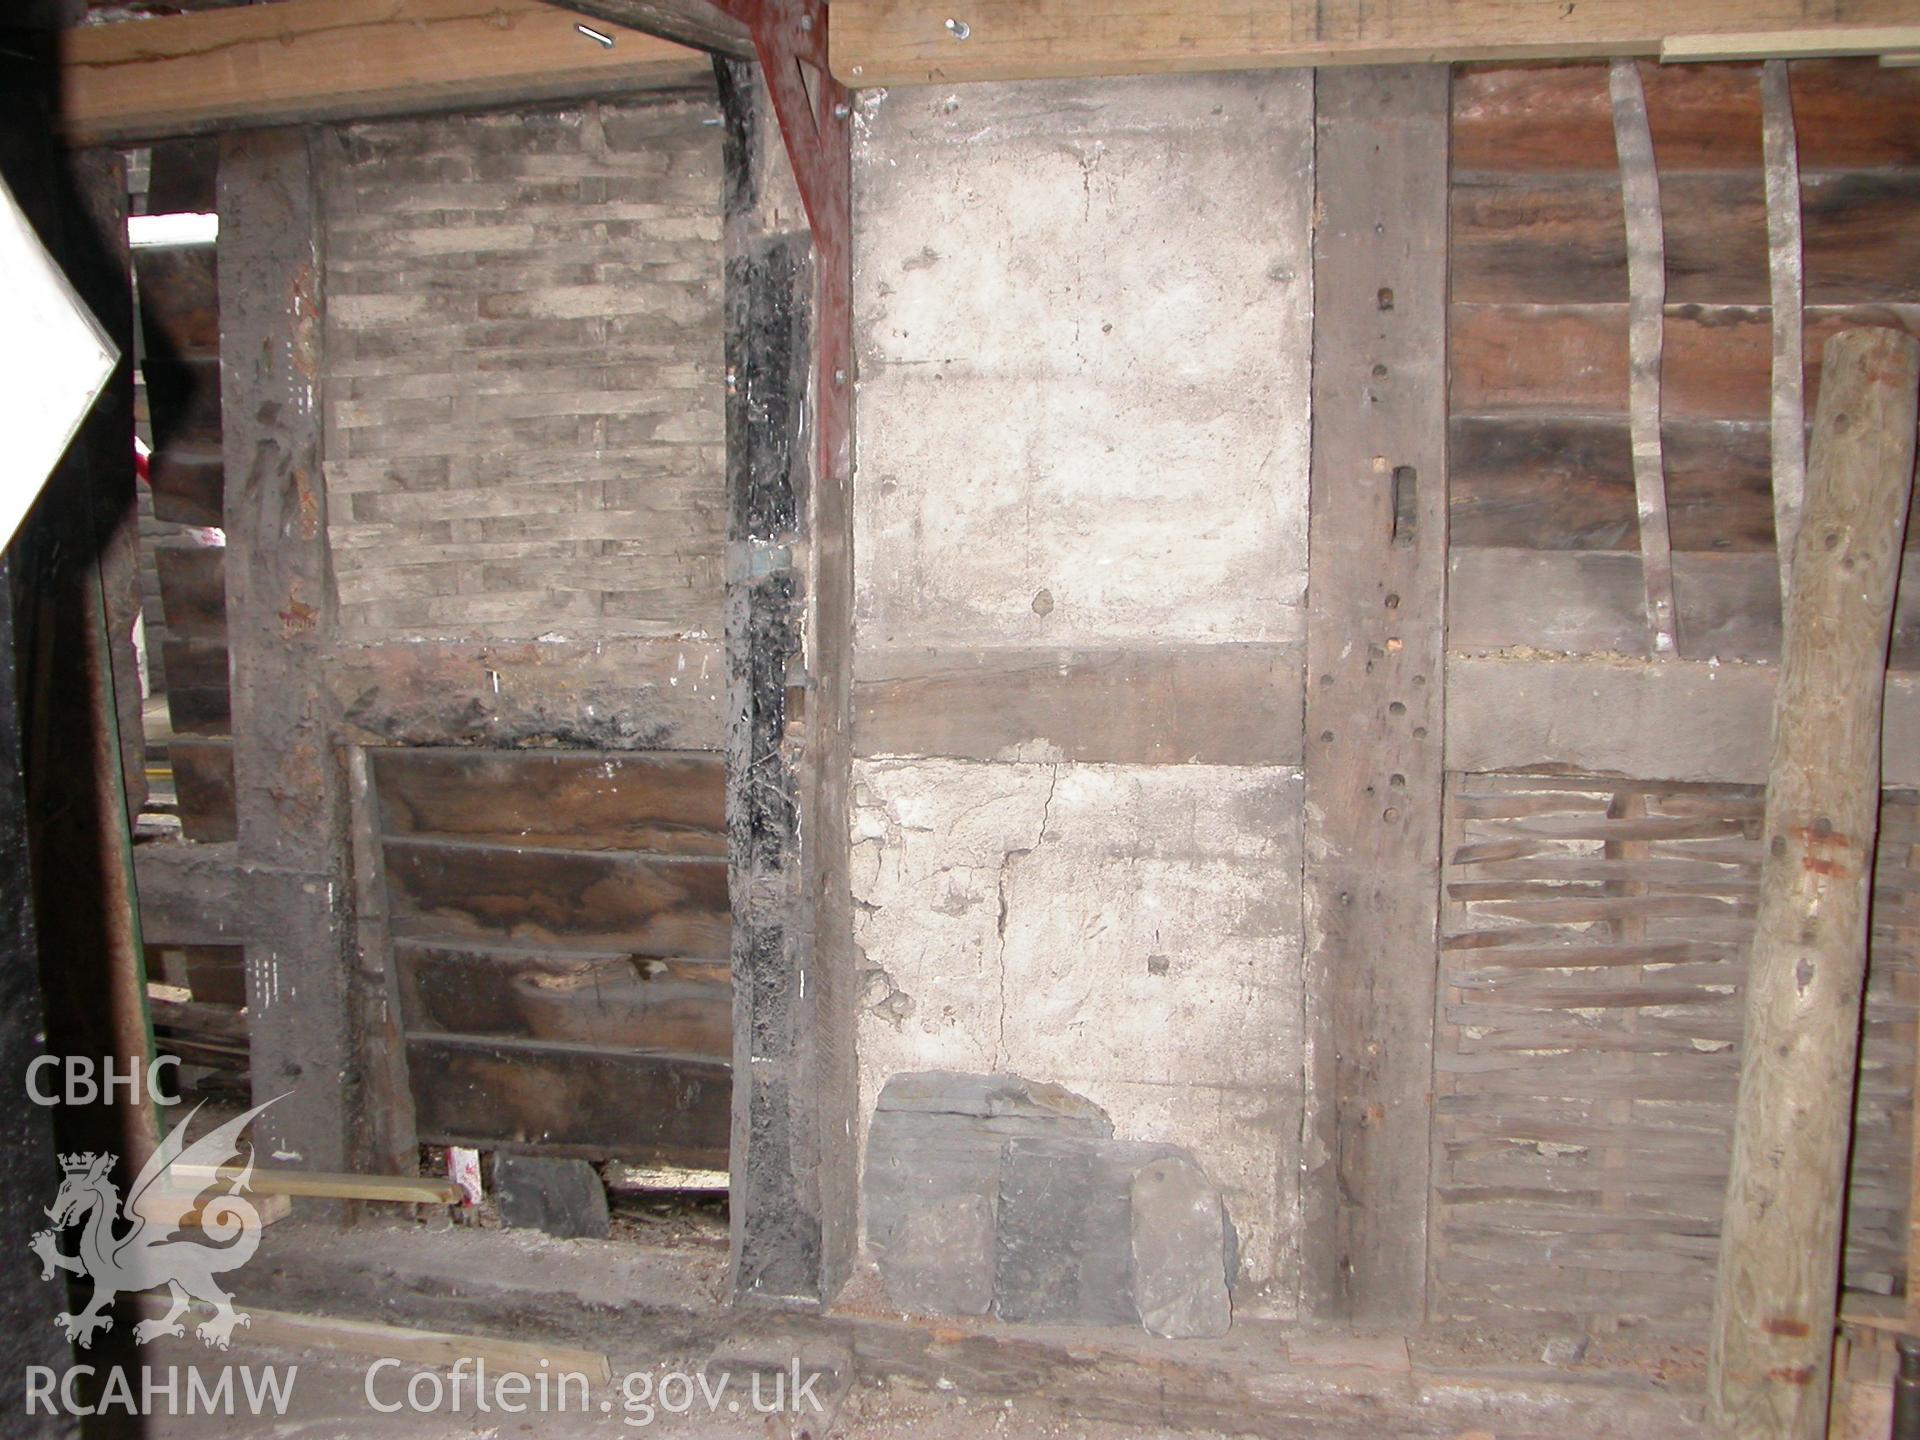 Interior of W wall showing fromer window frame evidence.